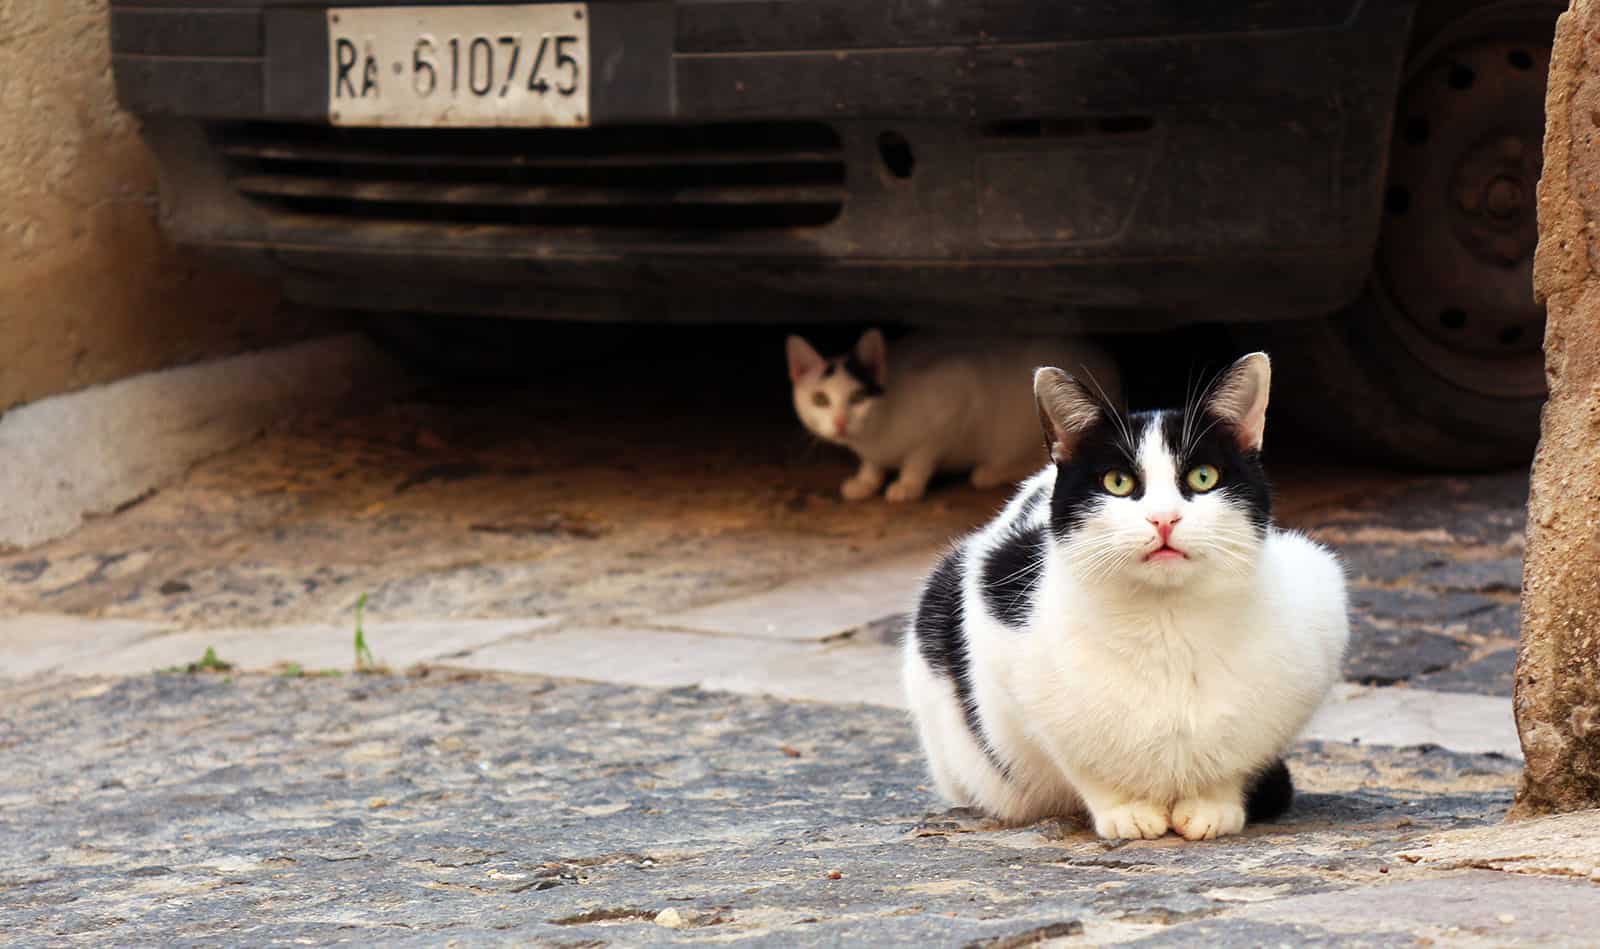 Two cats under a car in Italy.